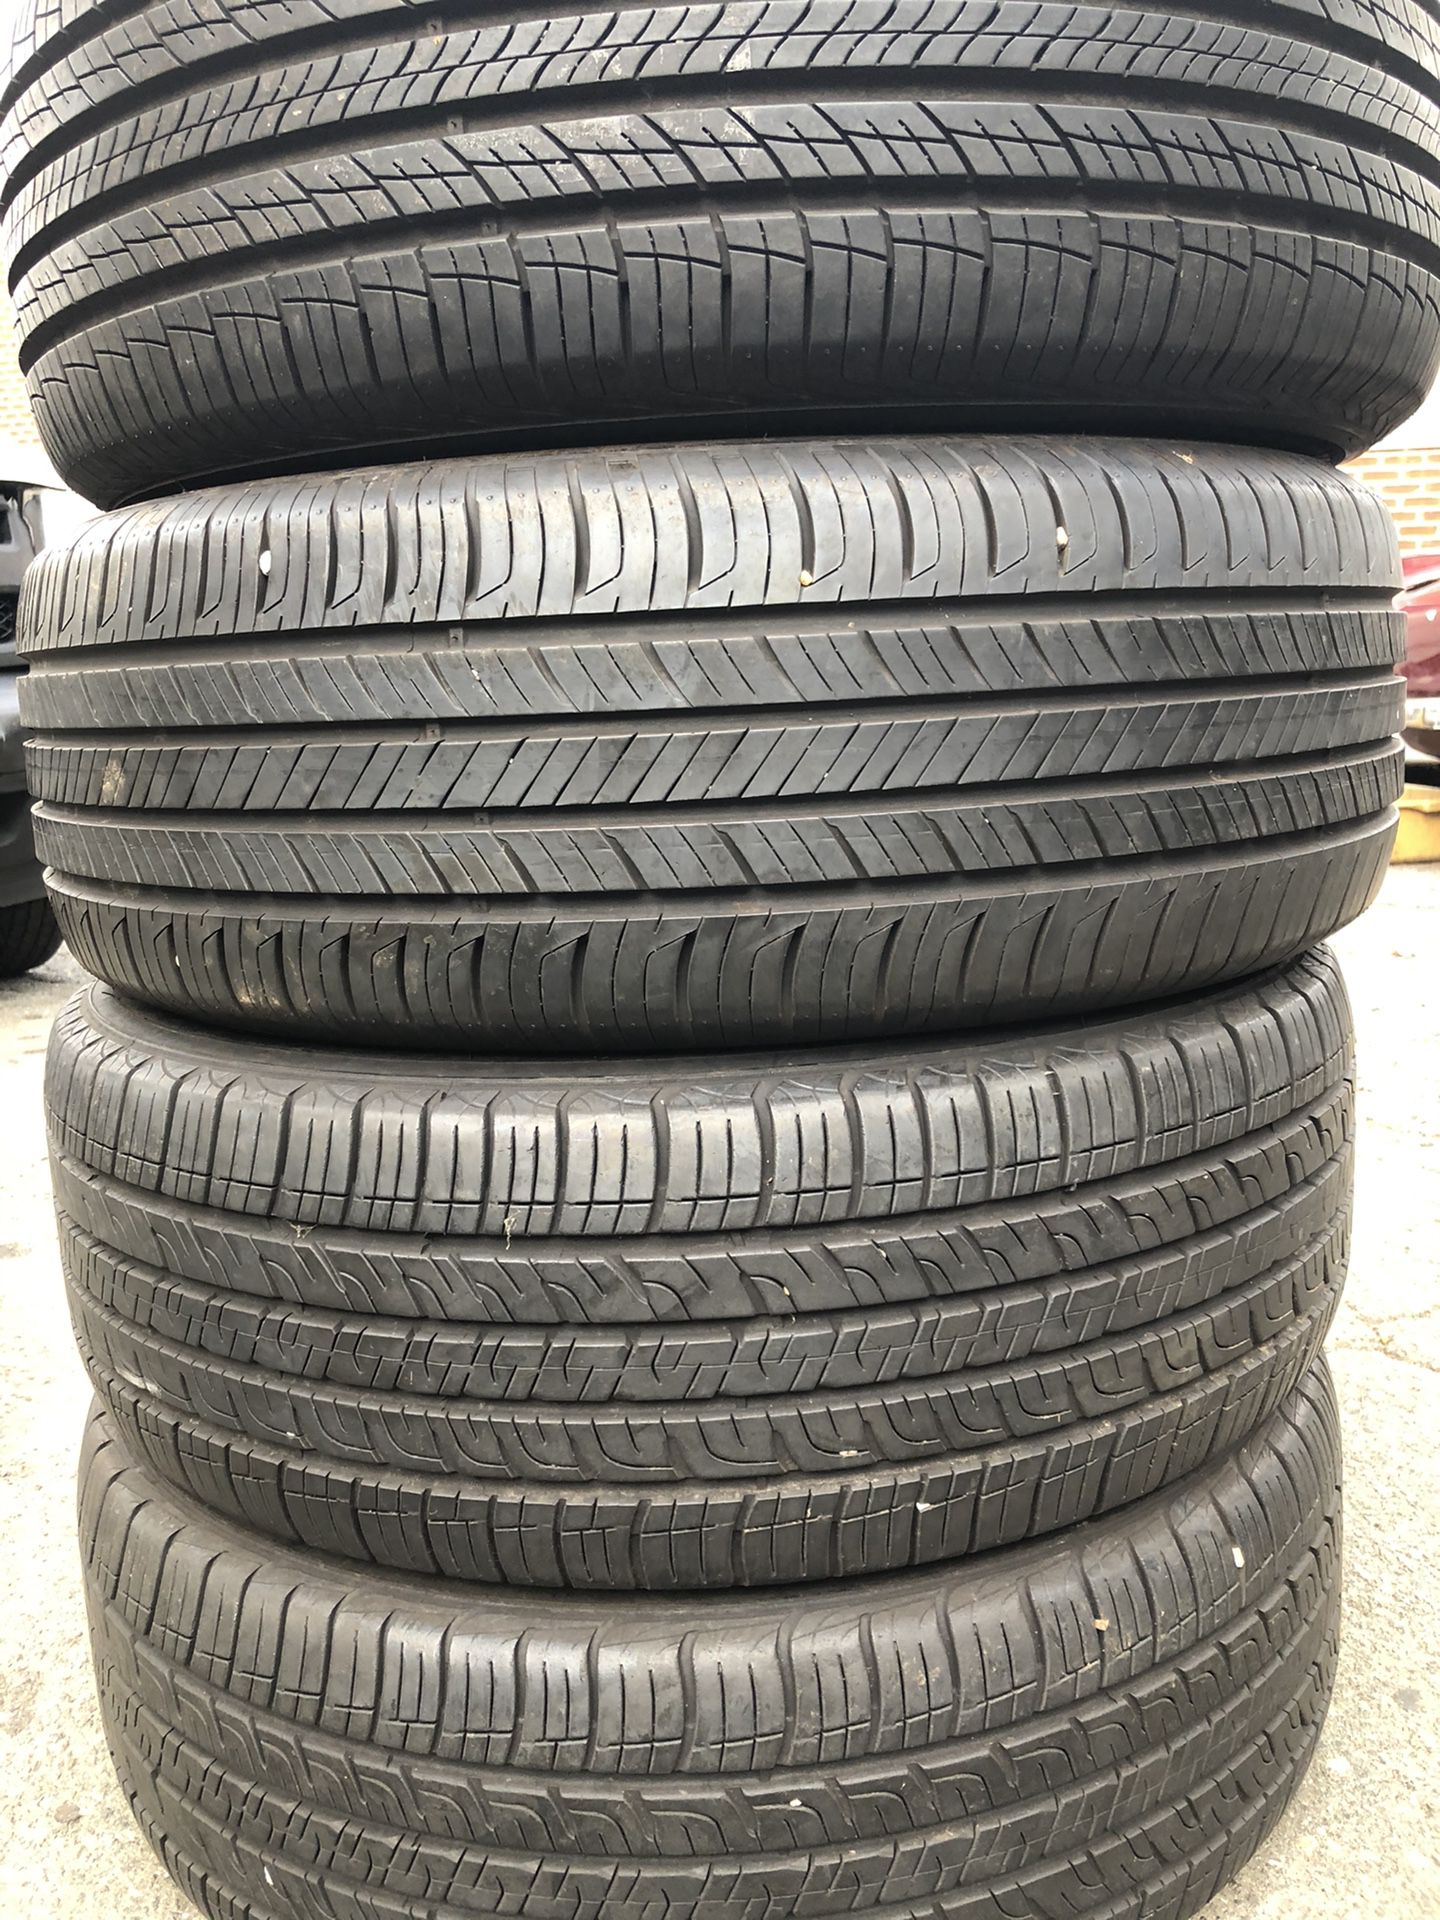 Set 4 usted tire 235/60R18 two Goodyear and two HANKOOK one have patch set 4 used tire $200 4 llantas usadas 235/60R18 2 Goodyear y 2 HANKOOK una tie